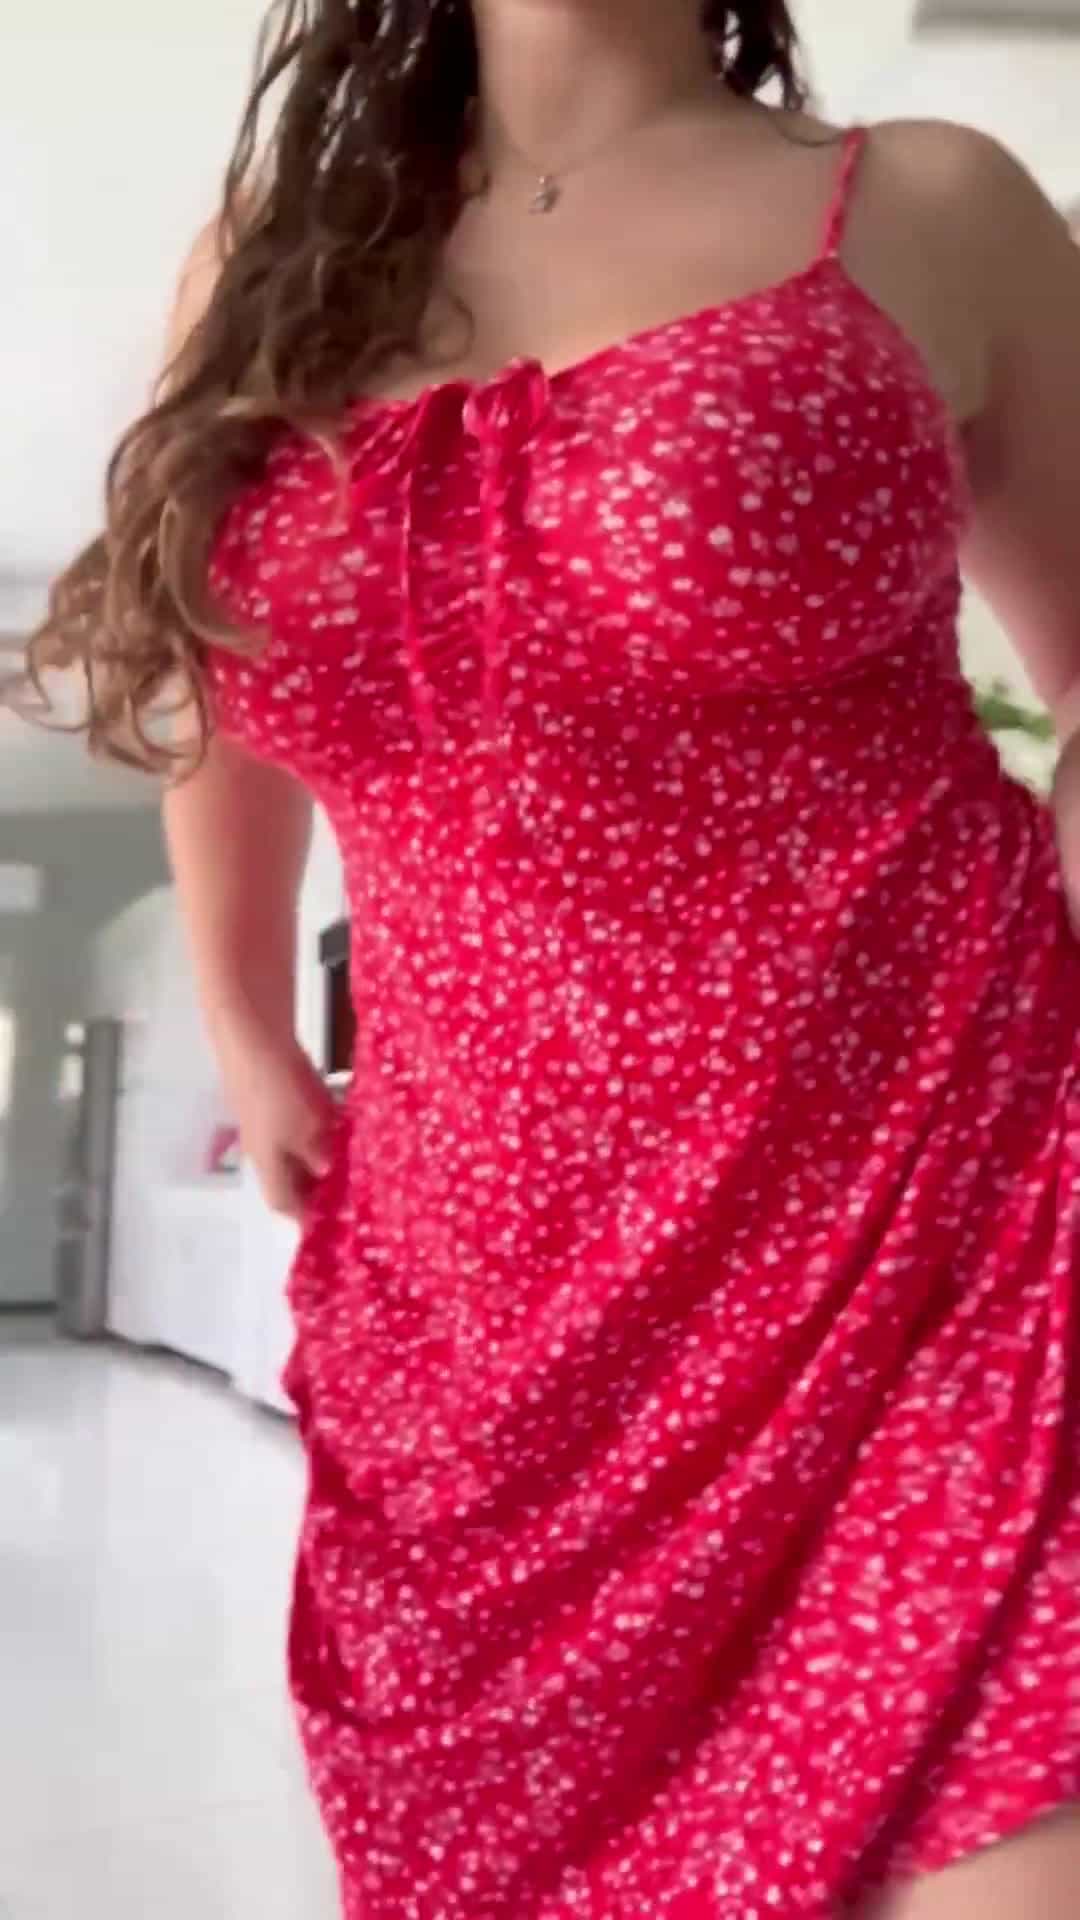 This dress both flatters and hides my curves ;)